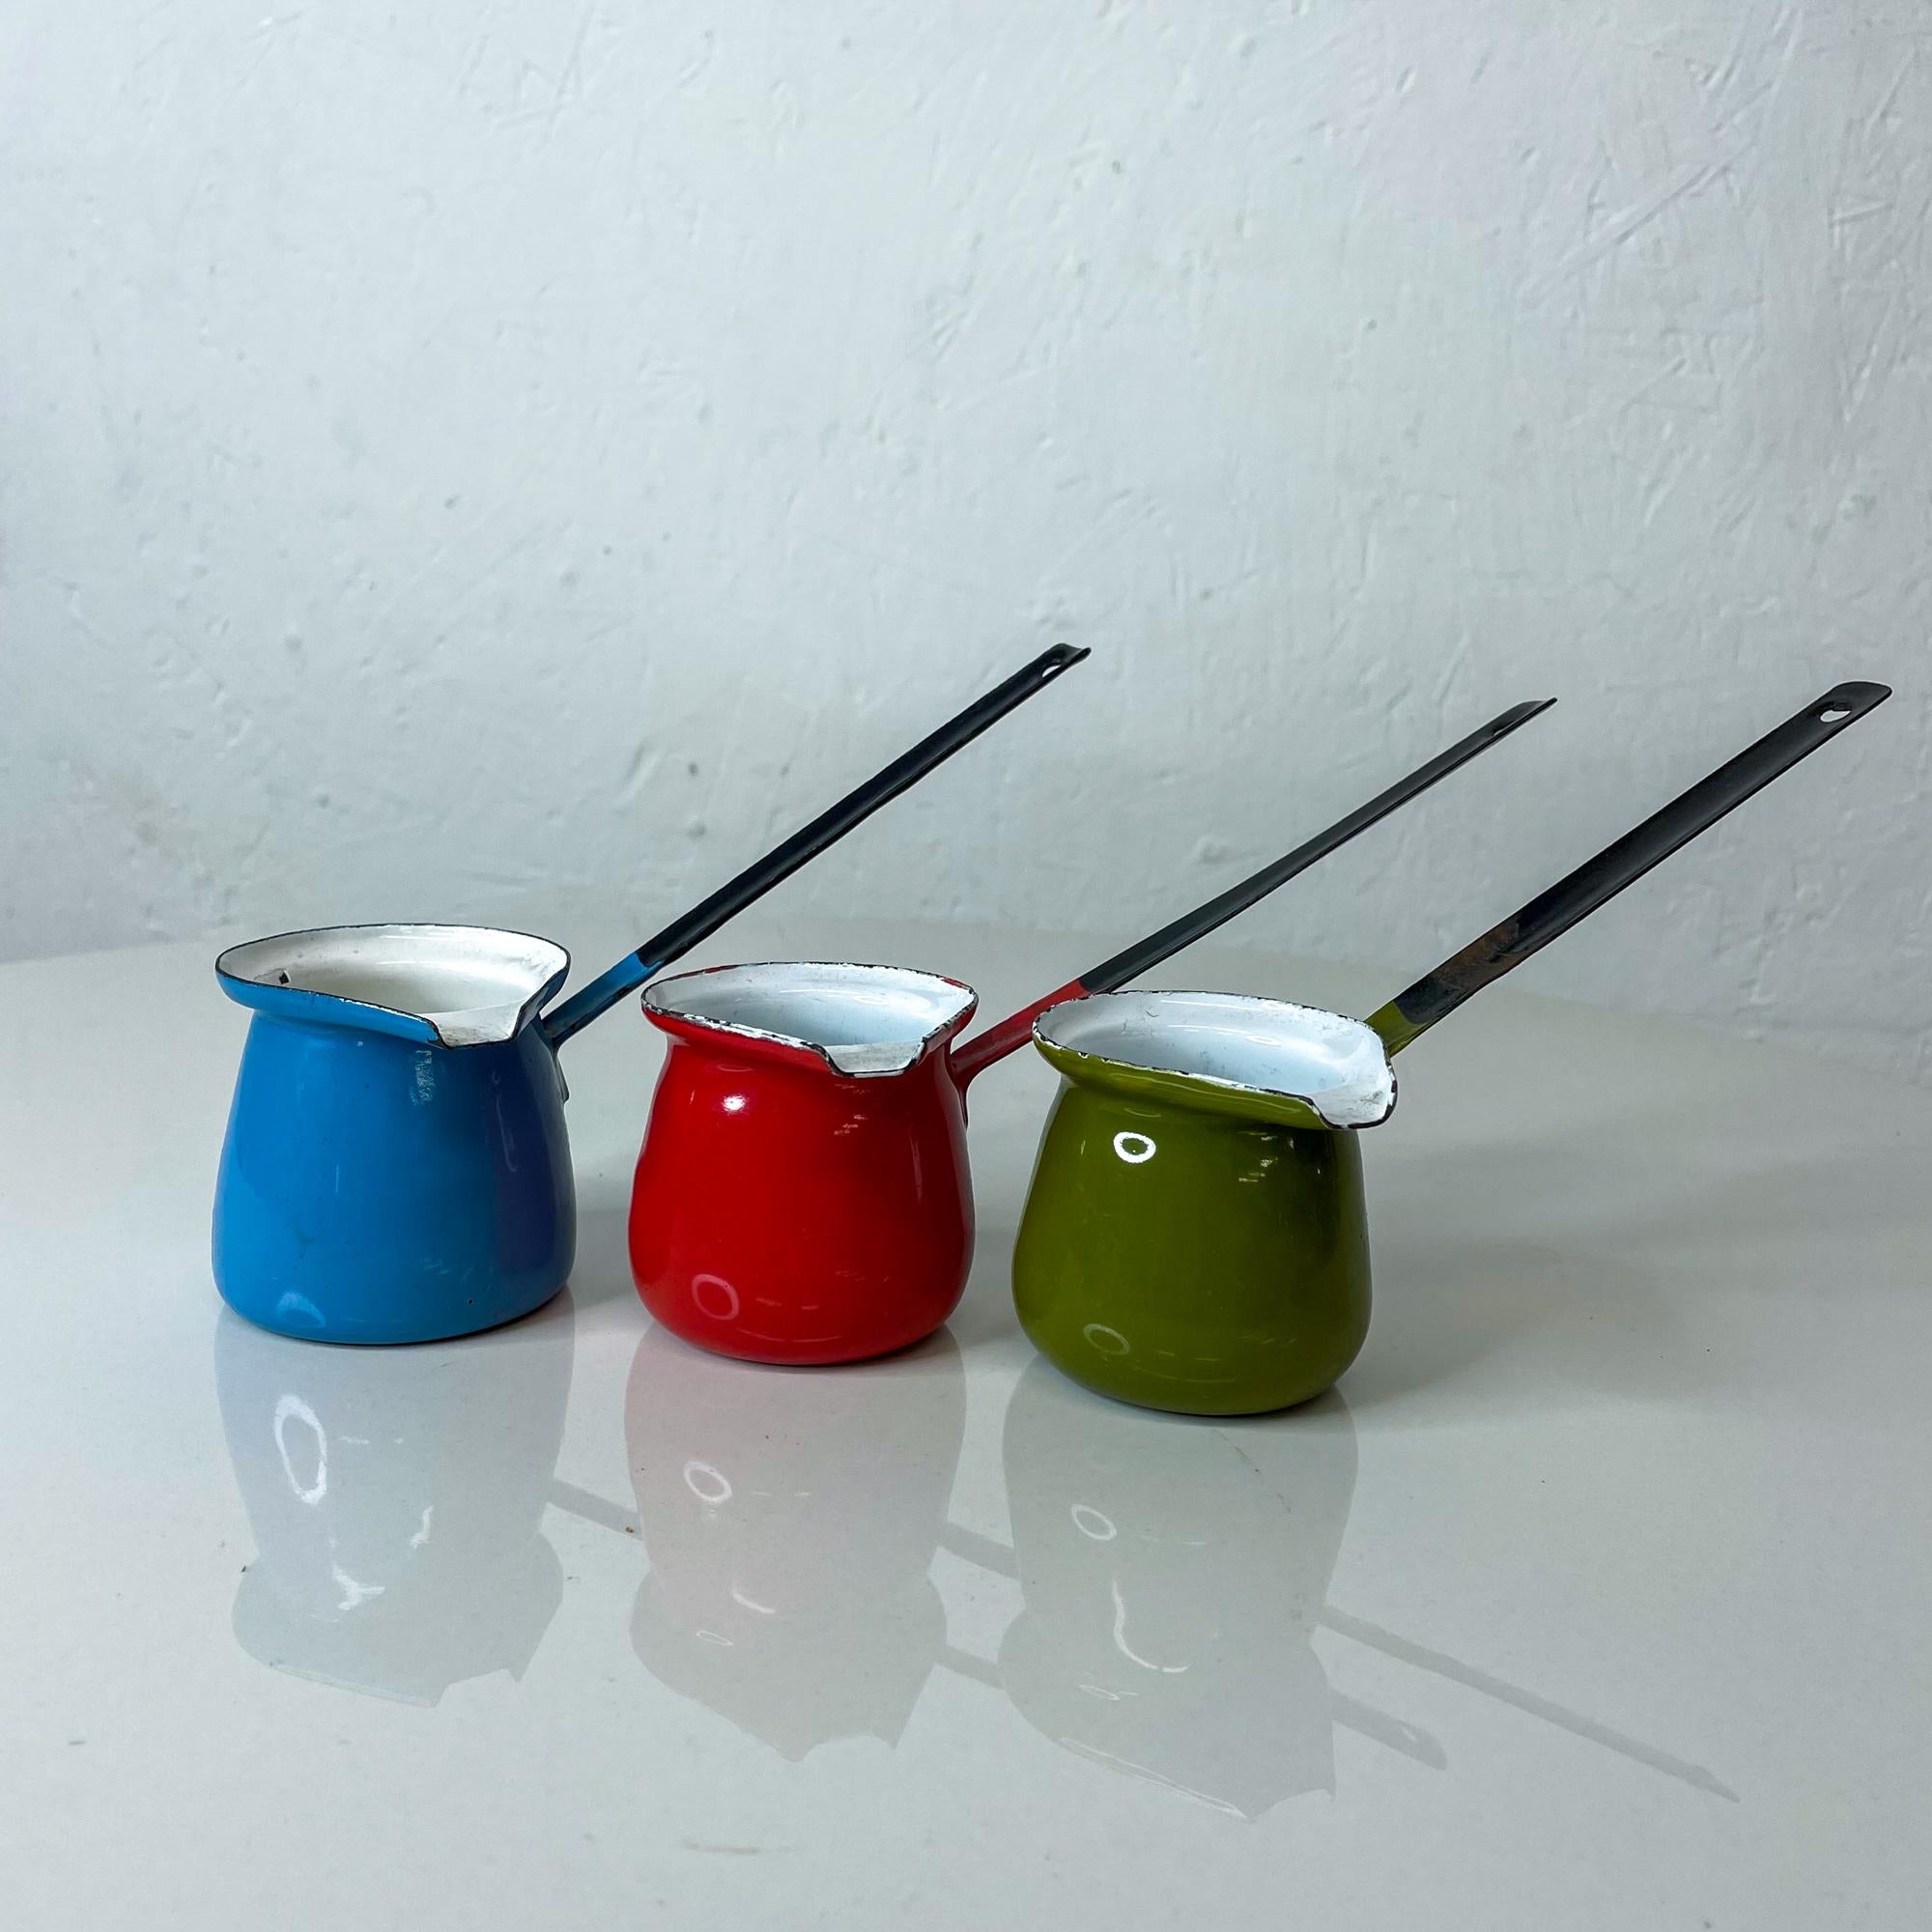 Ideal for farm house kitchen rustic cabin cottage life
Espresso Turkish coffee or ladle long handle feature
 Huta Silesia primary color enamel espresso shot Turkish coffee cups made in Poland 1960s
Measures: 6.25 Length x 2.5 diameter x 4 height